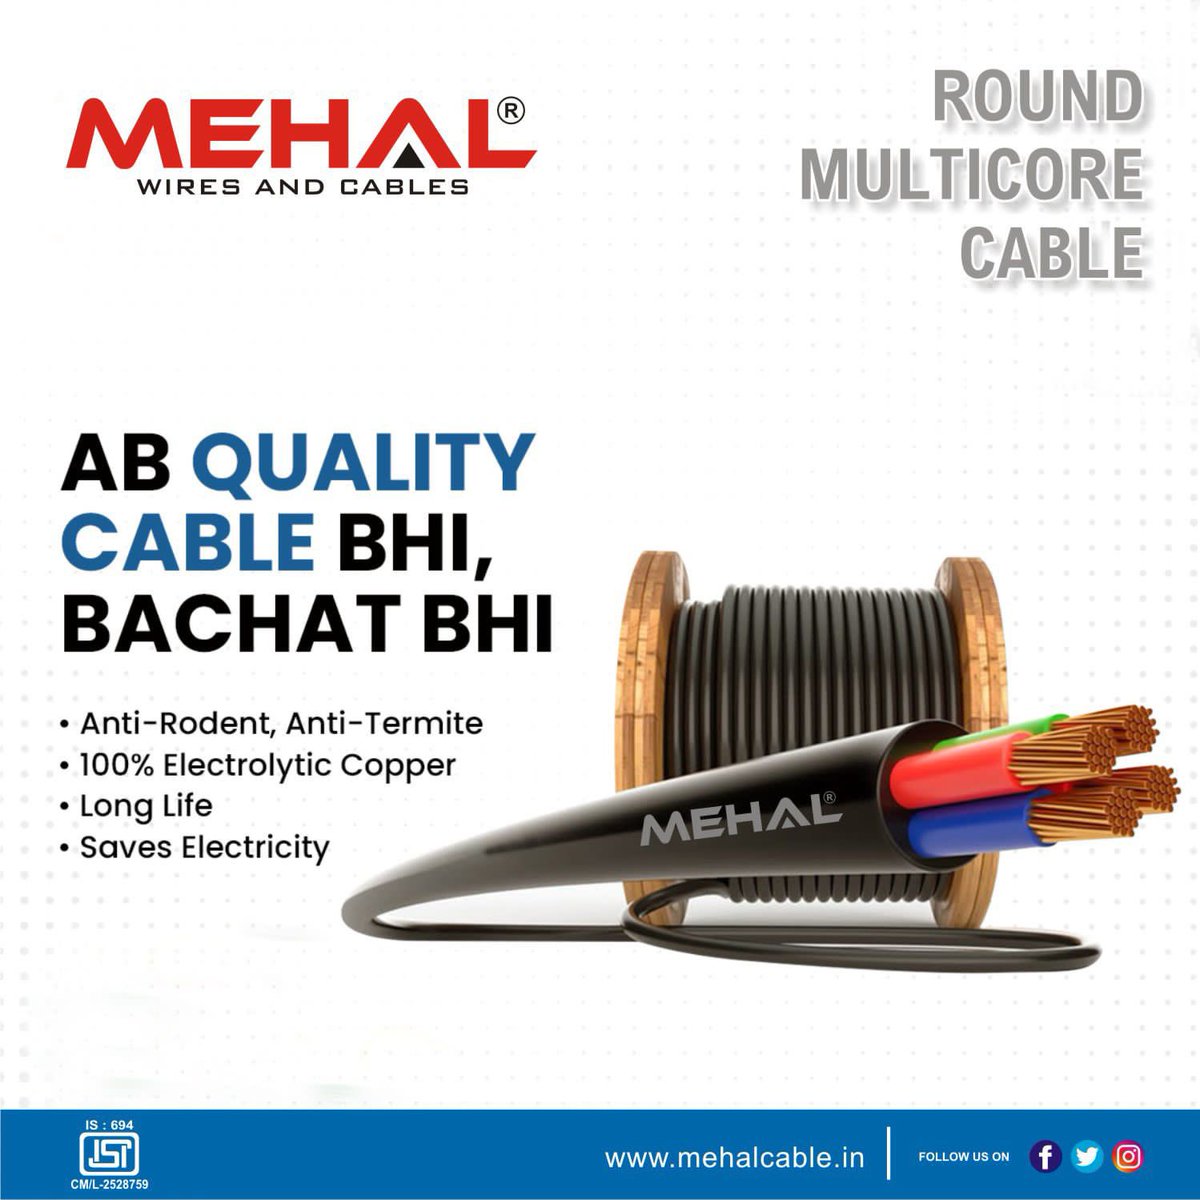 Ab quality cable bhi , bachat bhi 💰 #switchtomehalwires #roundflexible #multicore #muticorecables #copper #industrial #factory #heavymachinery #equipment #electricalengineering #engineer mehalcable.in